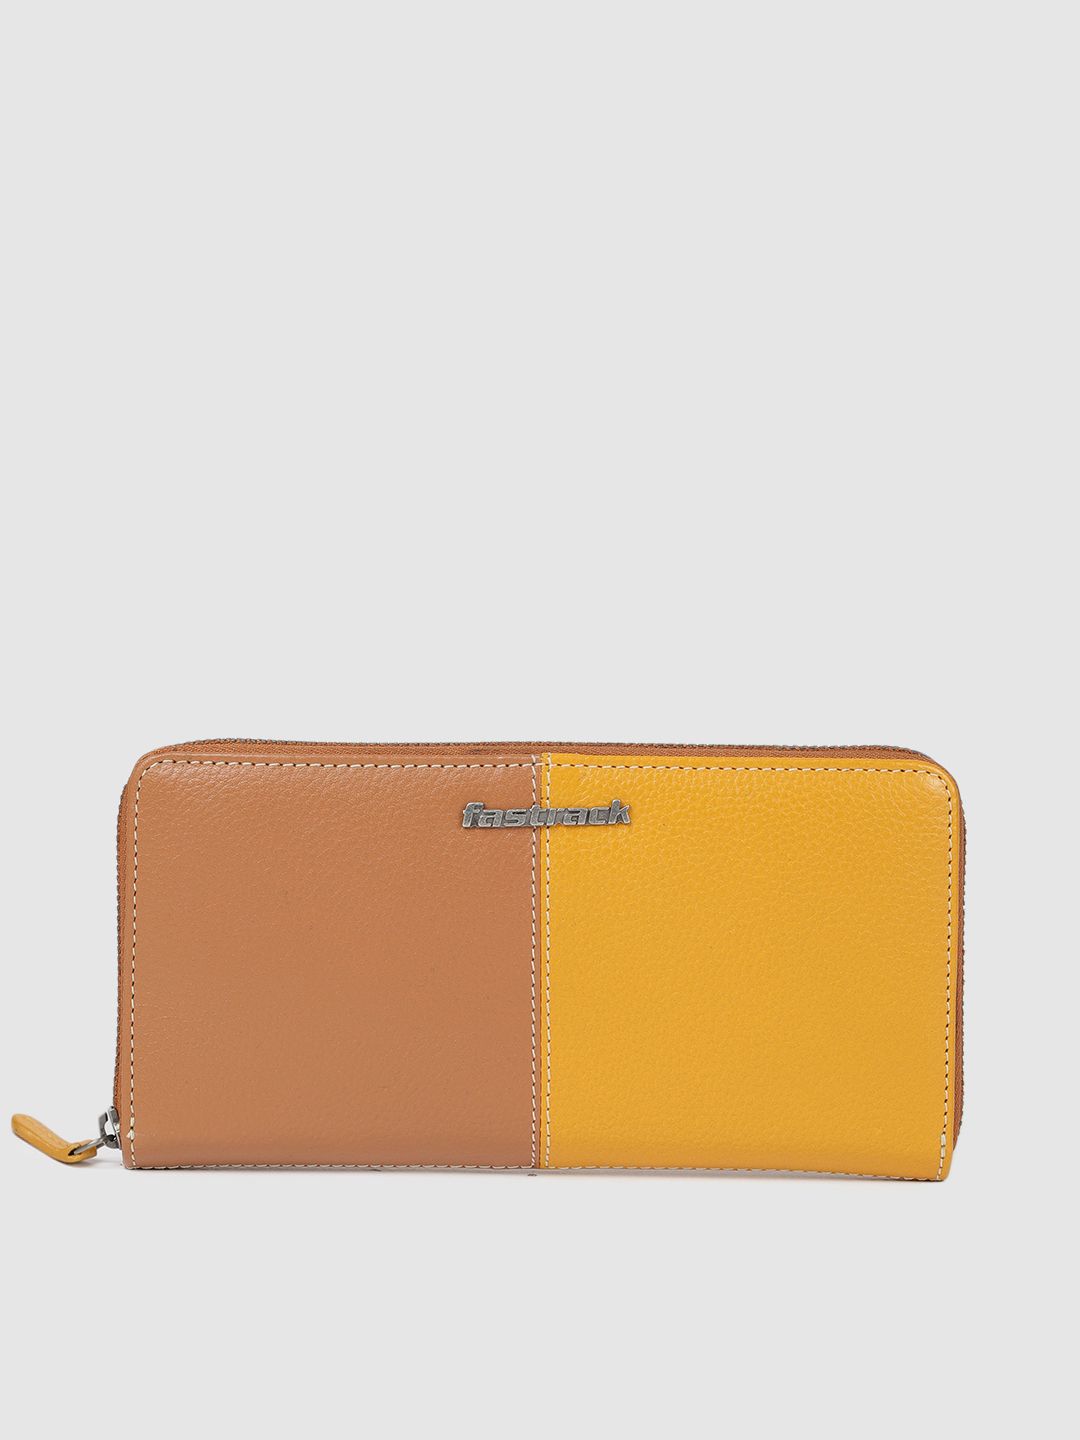 Fastrack Women Tan & Yellow Colourblocked Zip Around Leather Wallet Price in India